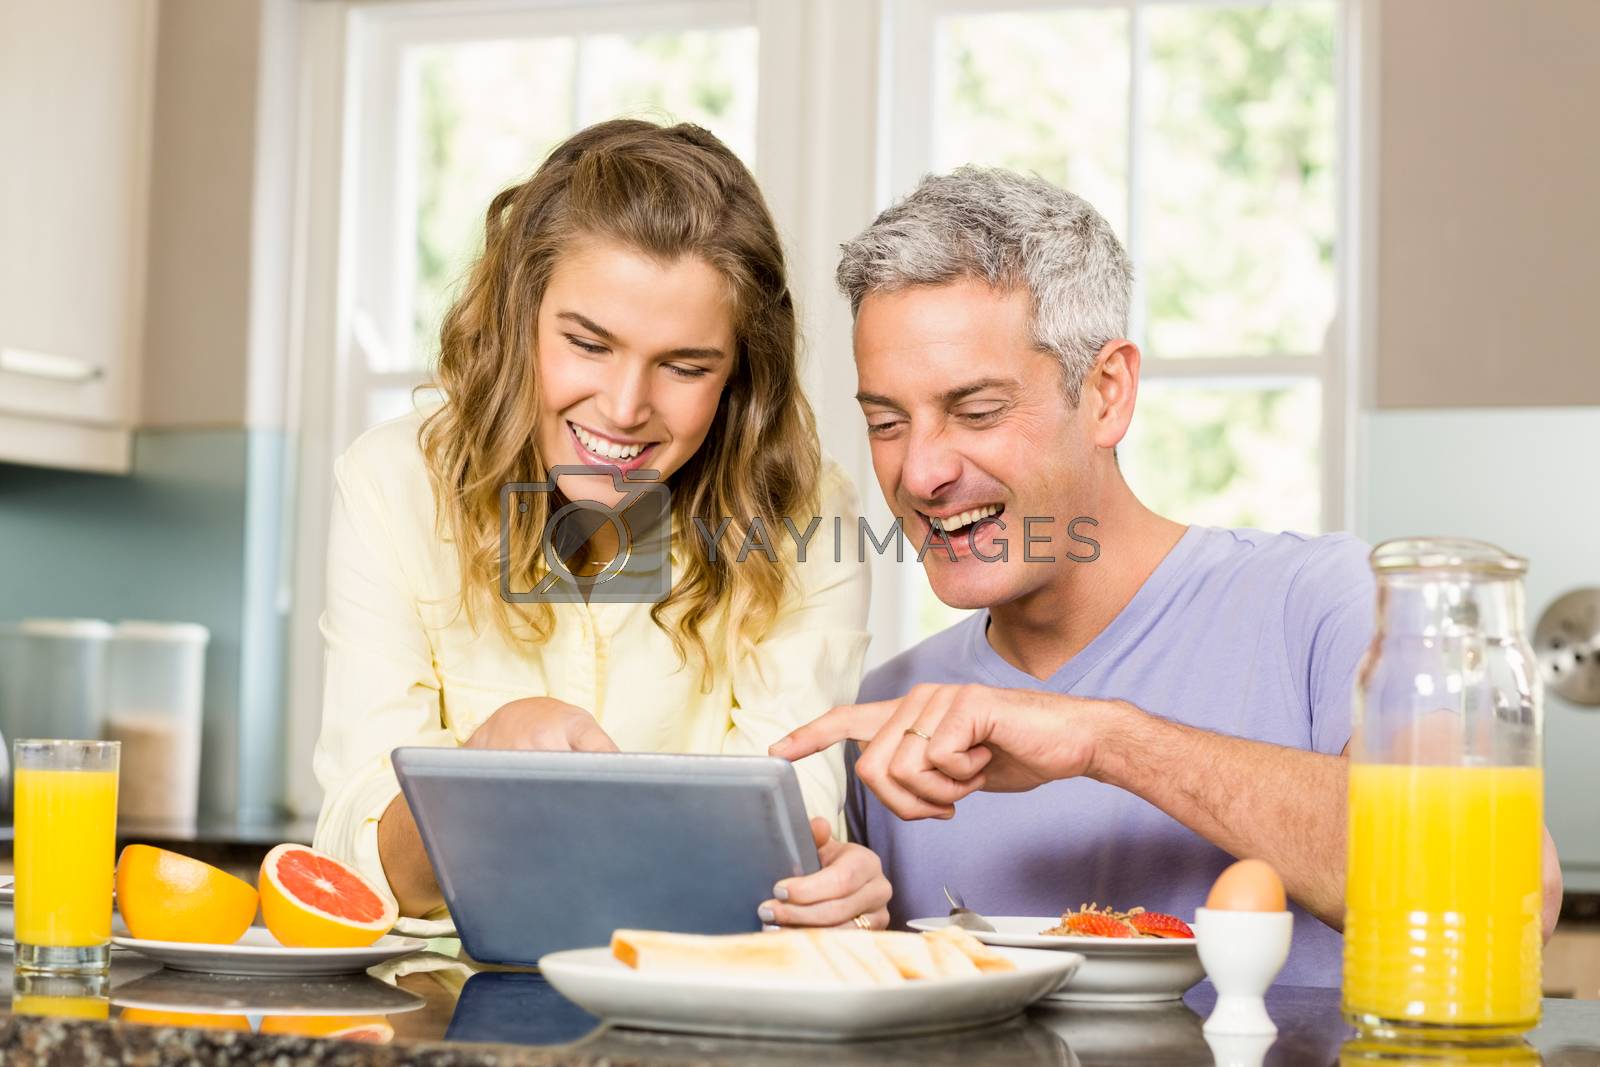 Royalty free image of Happy couple using tablet and having breakfast by Wavebreakmedia